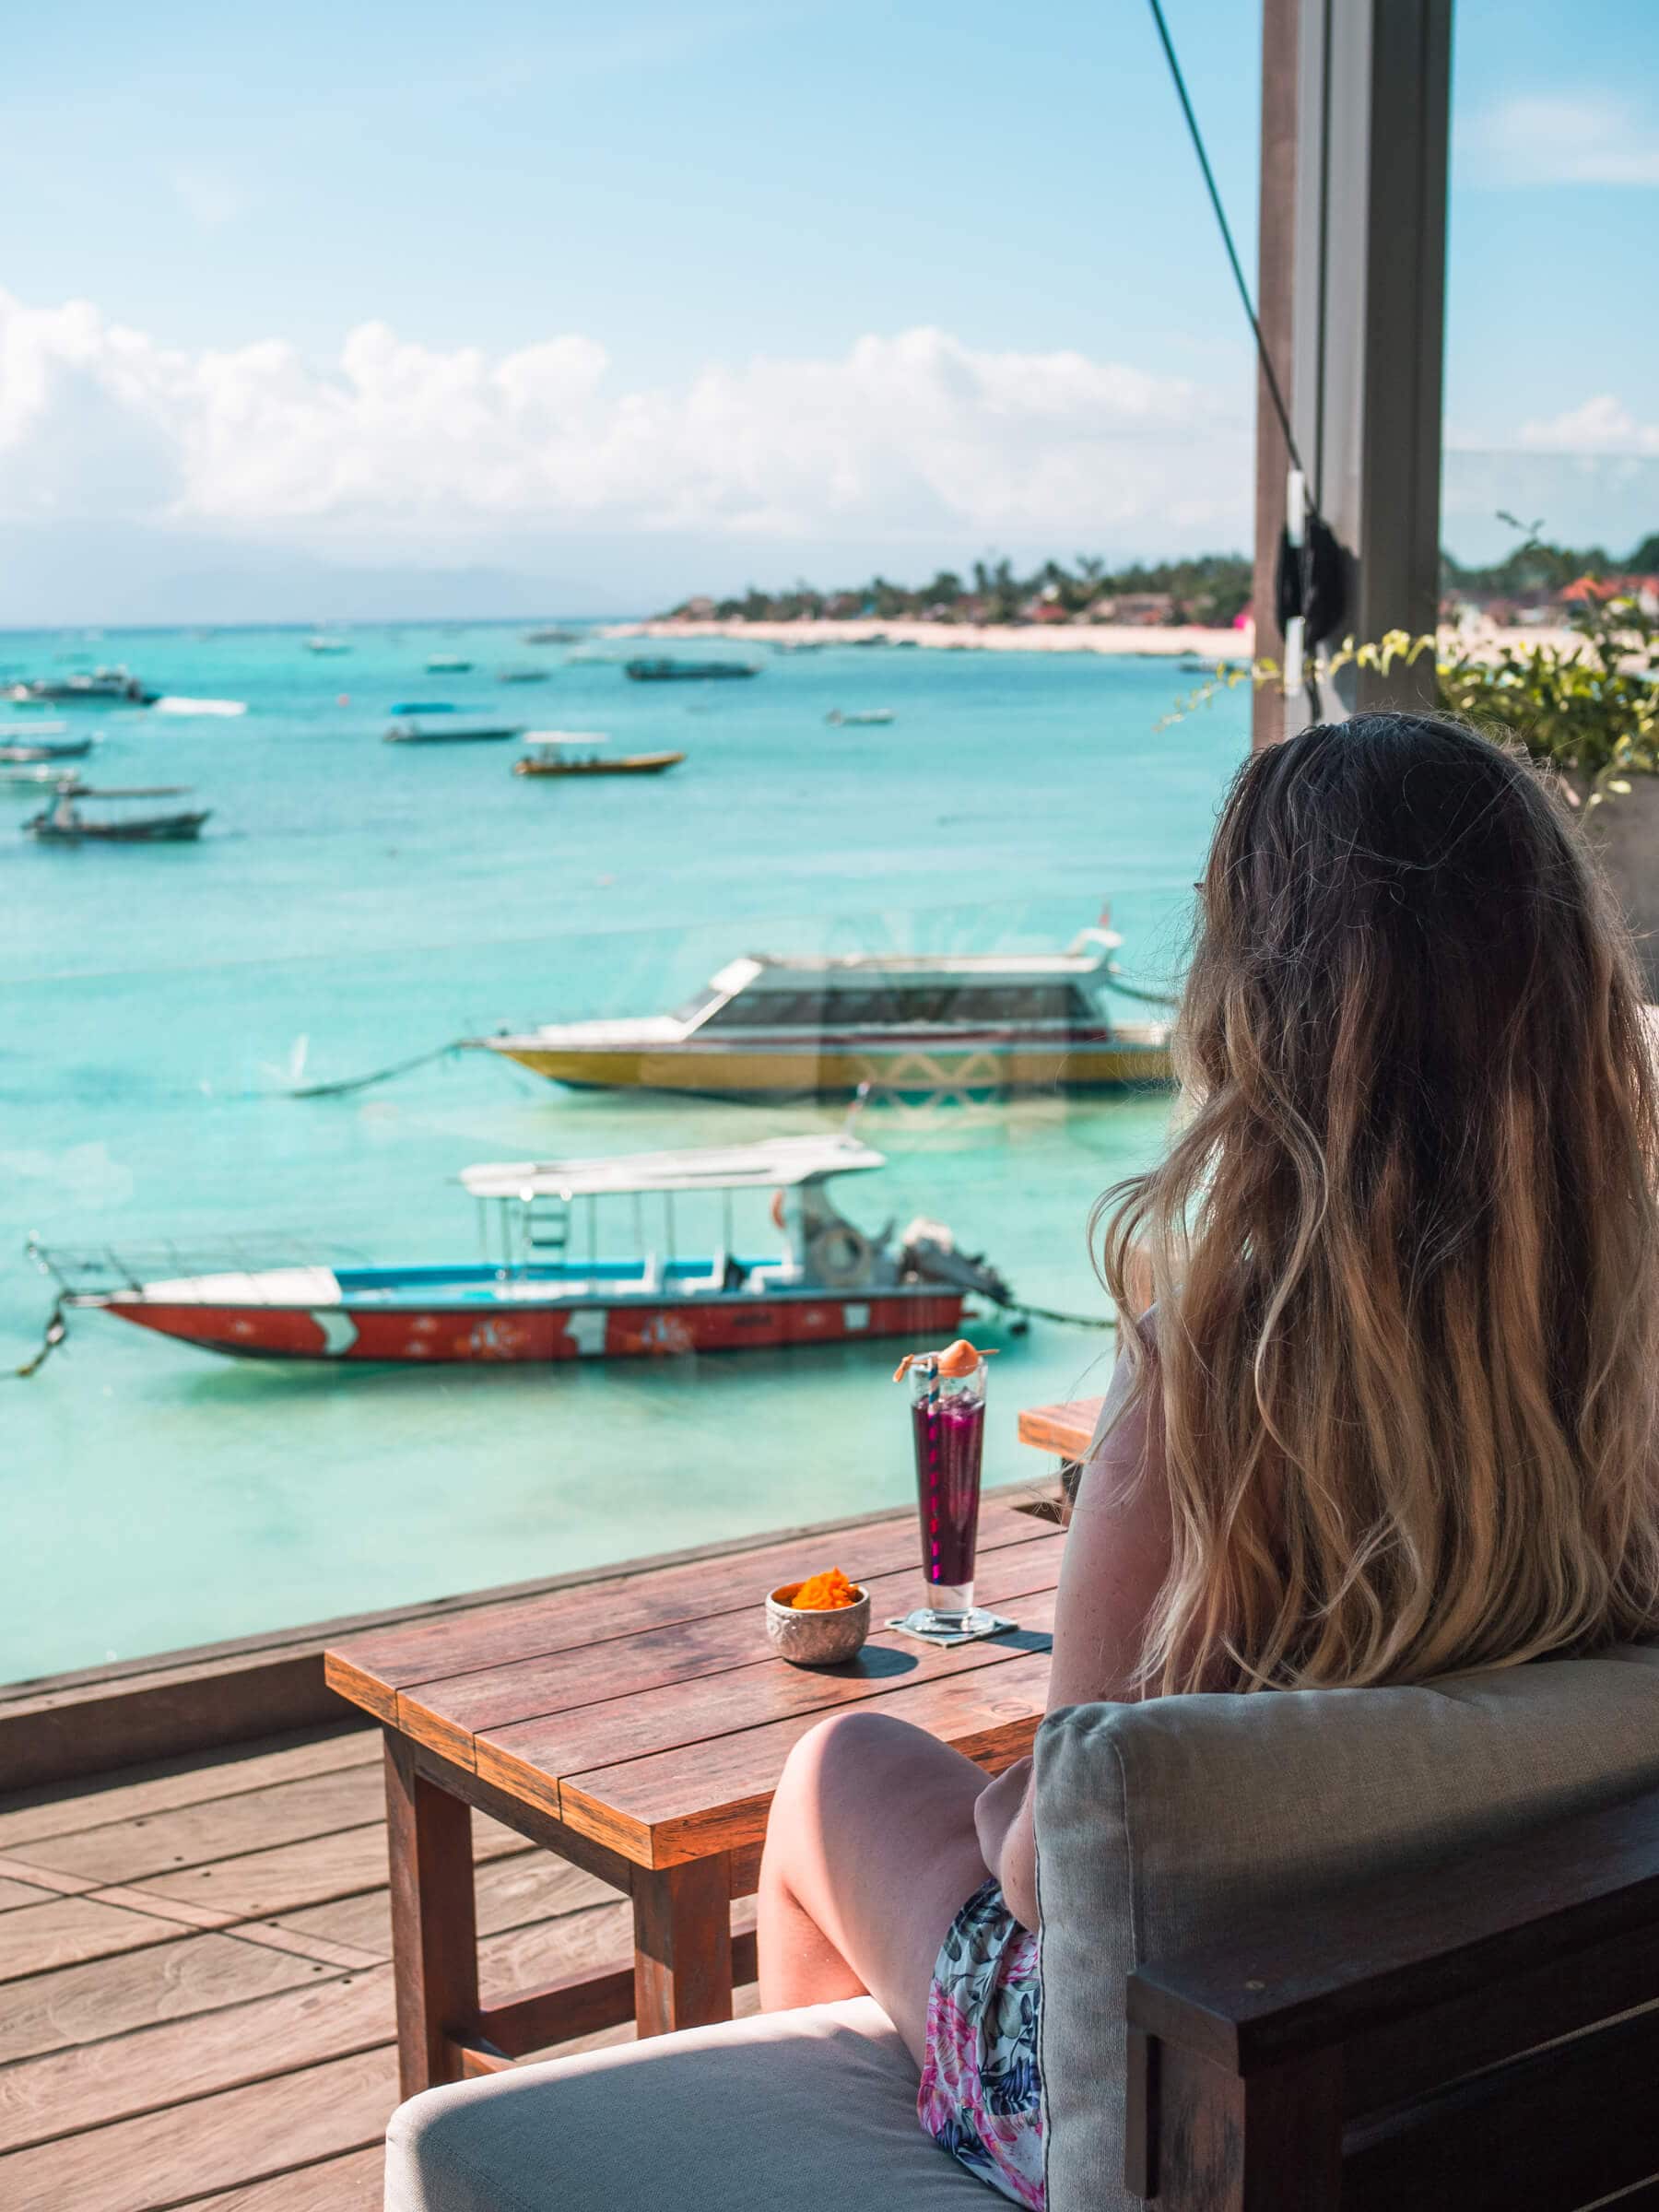 Girl with long hair and a purple drink enjoying the view of turquoise water and Jungut Batu Beach on a day trip to Nusa Lembongan from Bali.